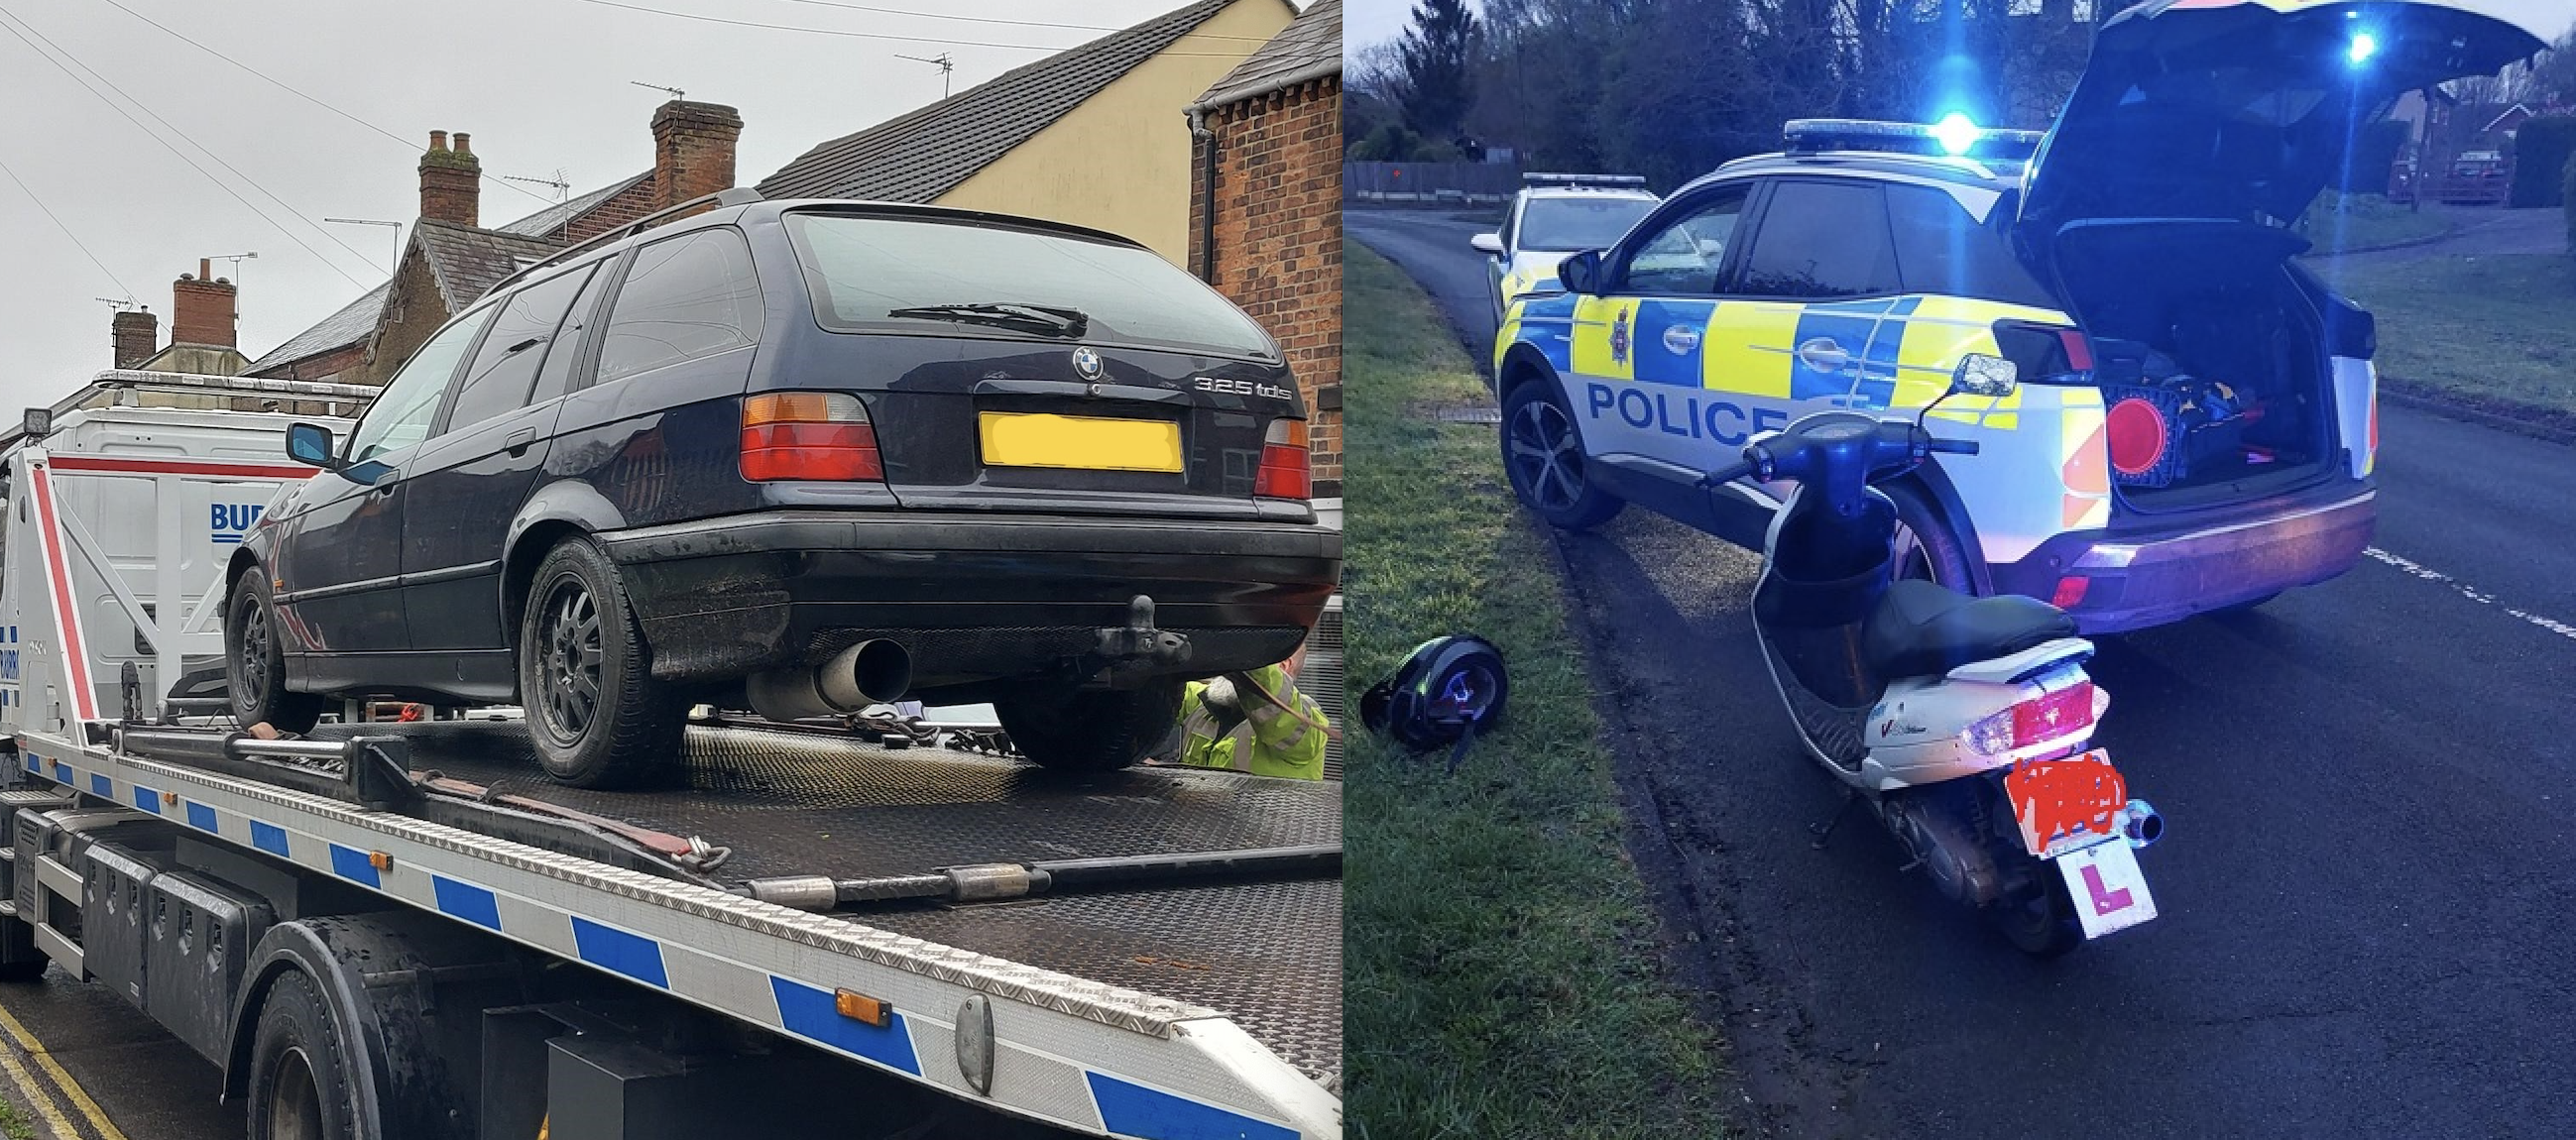 More uninsured vehicles seized by police